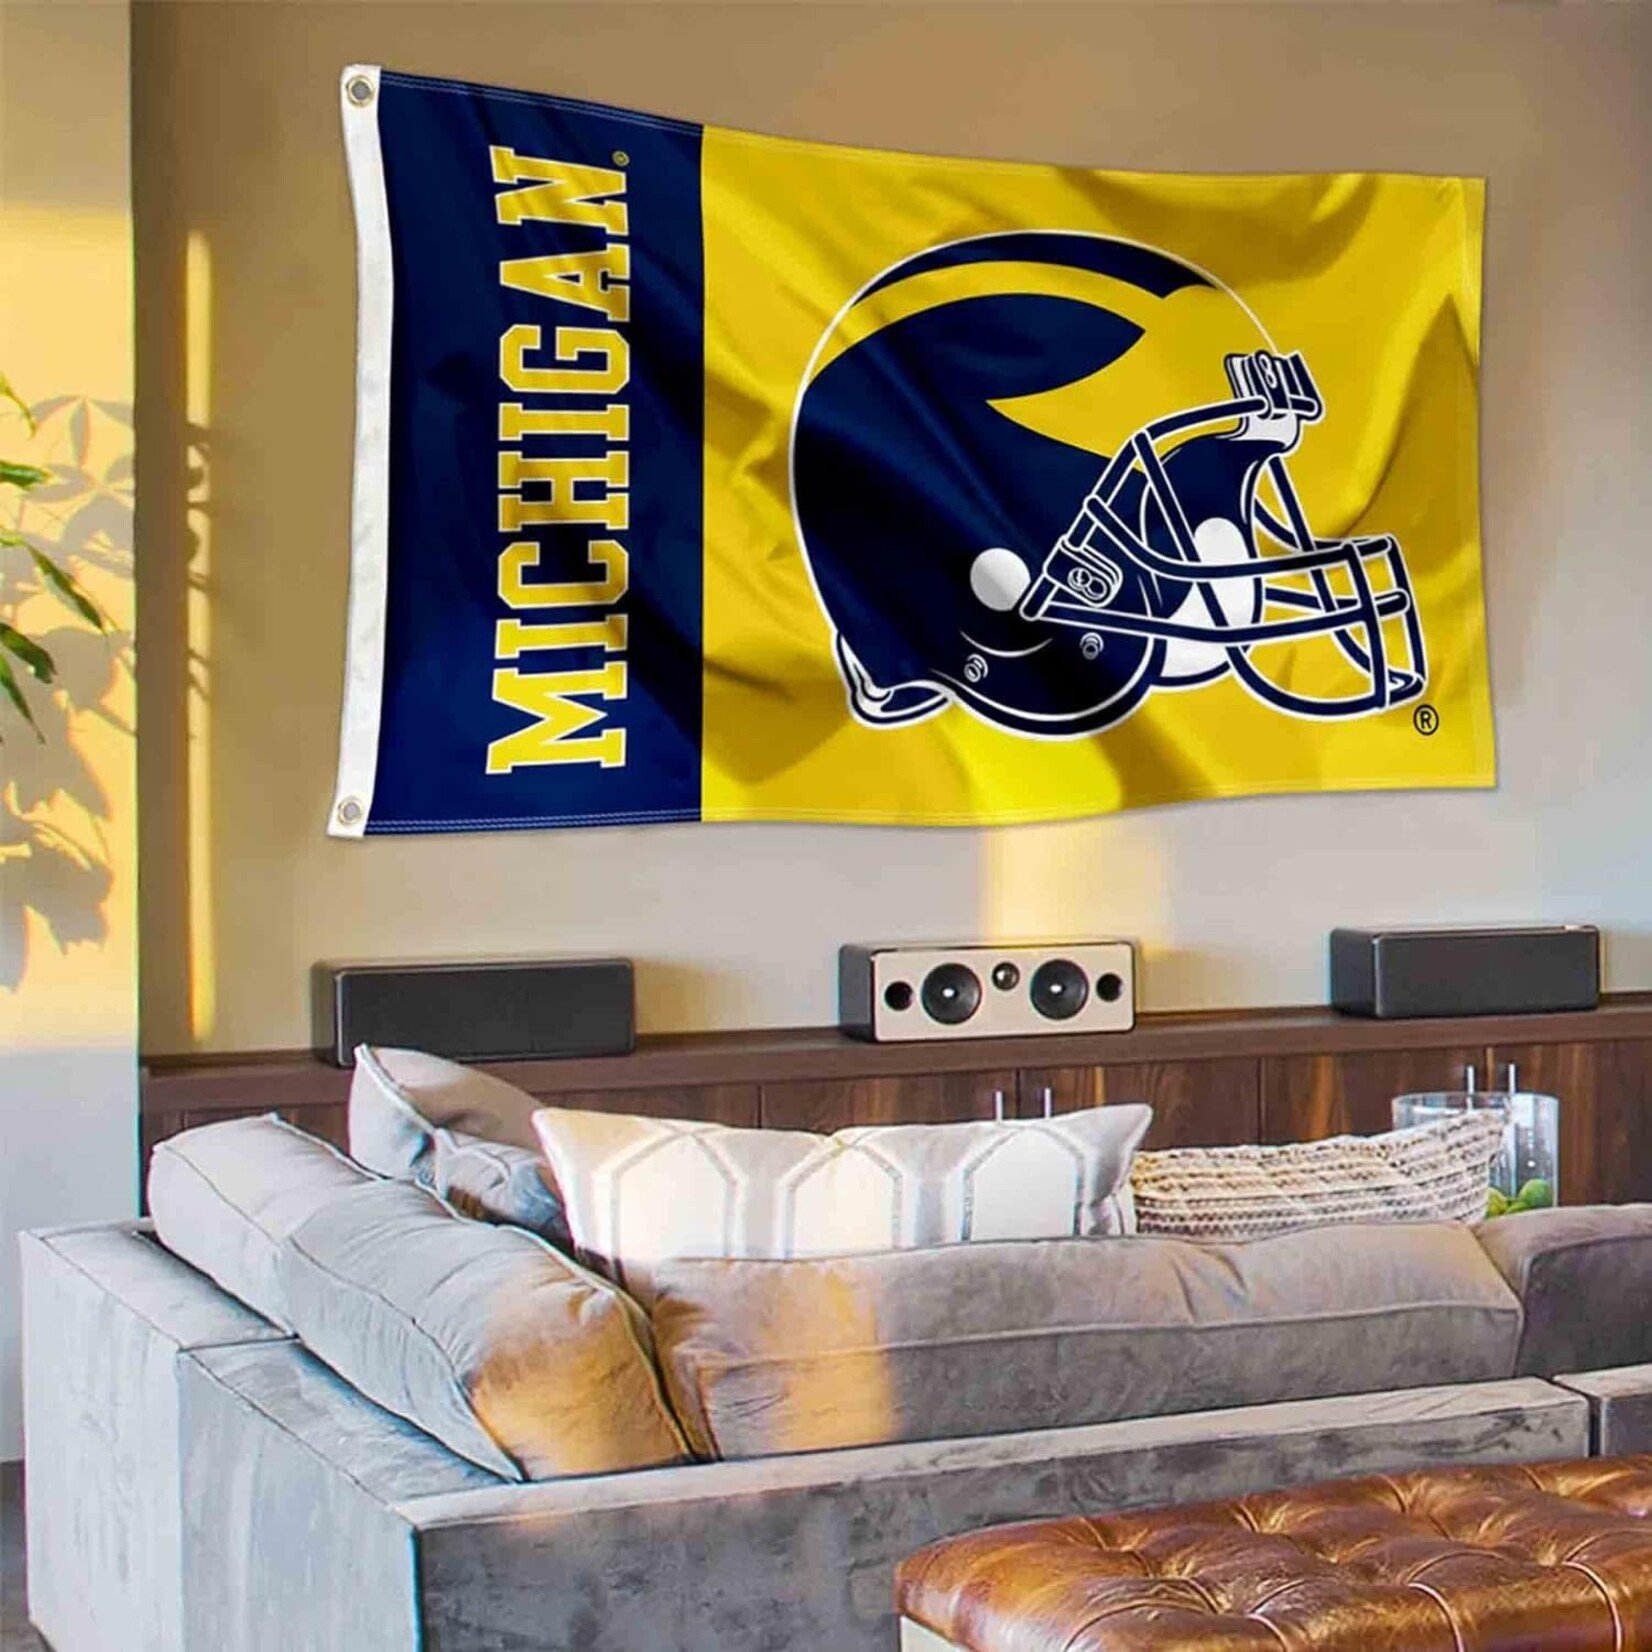 Sewing Concepts Michigan Wolverines Flag 3' x 5' Large Football Helmet